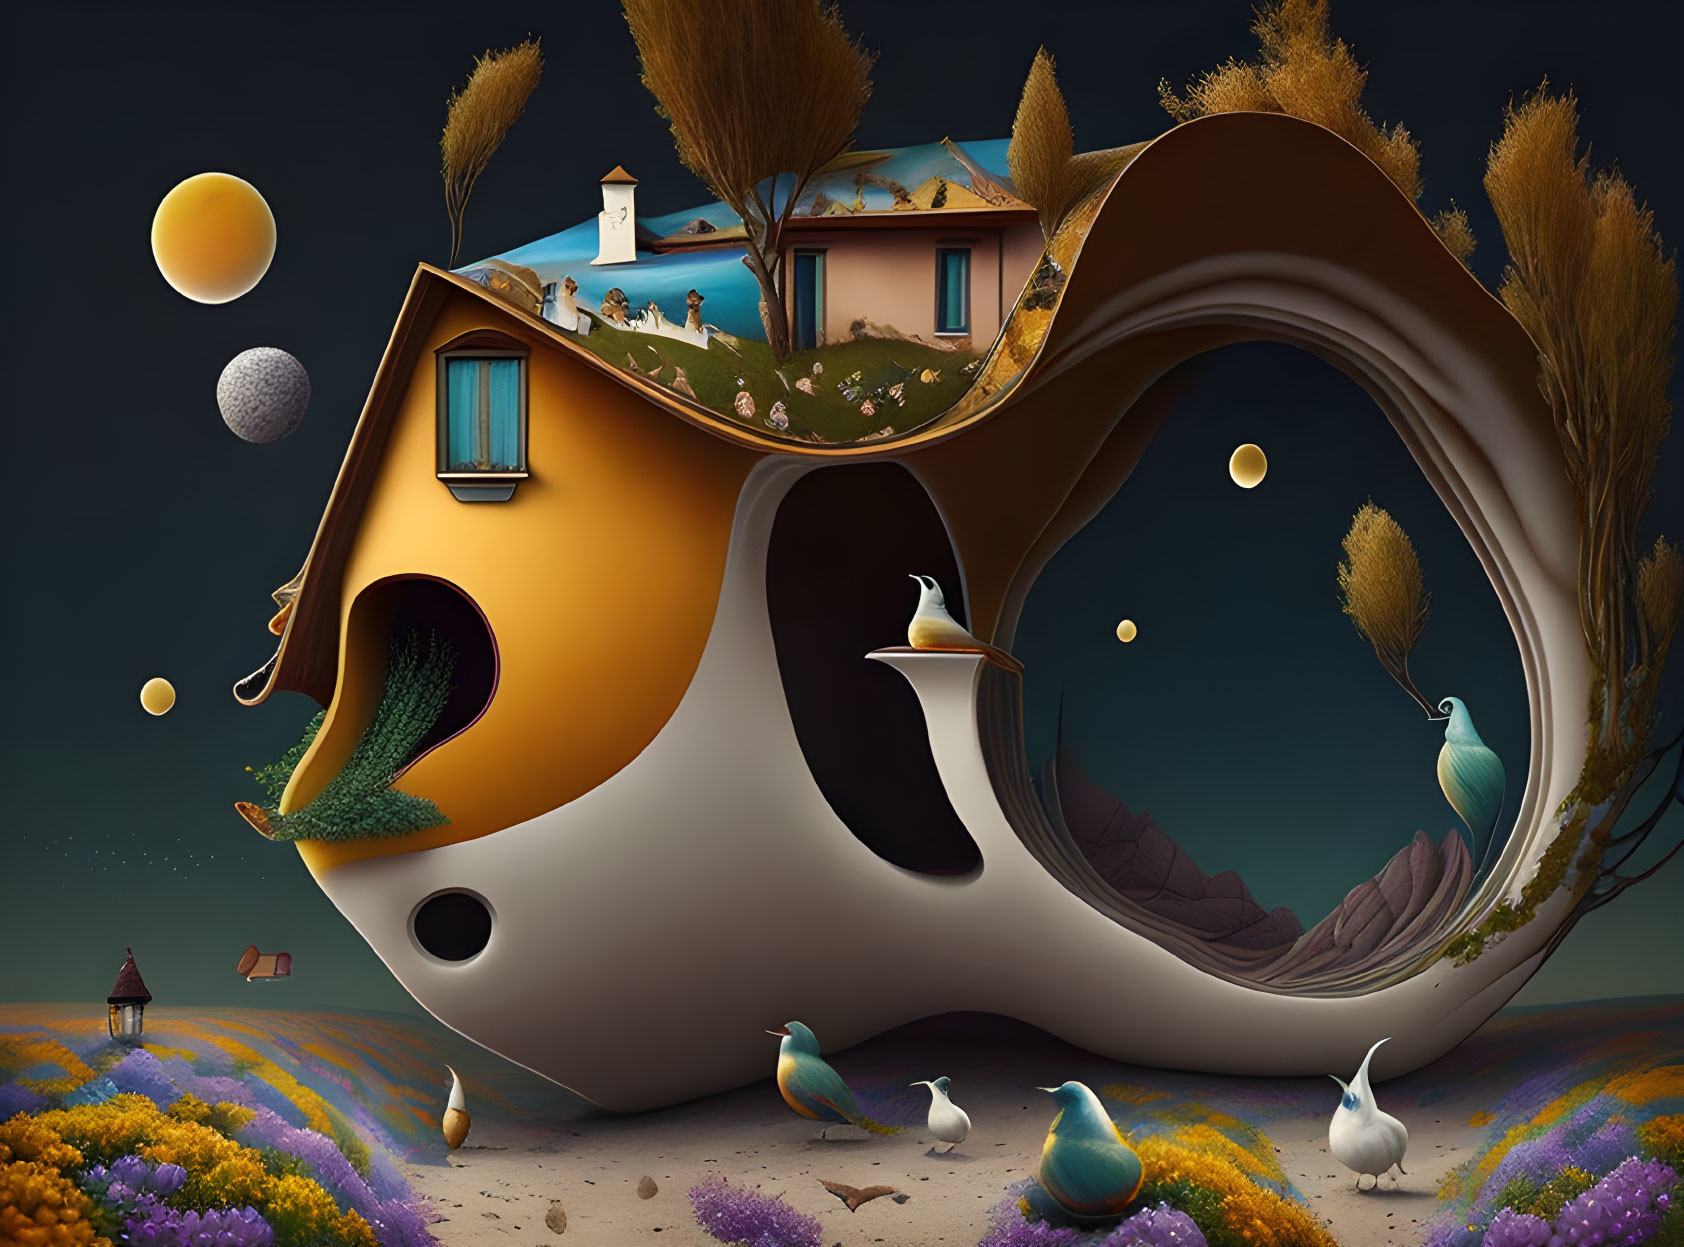 Surreal landscape with Möbius strip hill, floating orbs, whimsical trees, pear-shaped